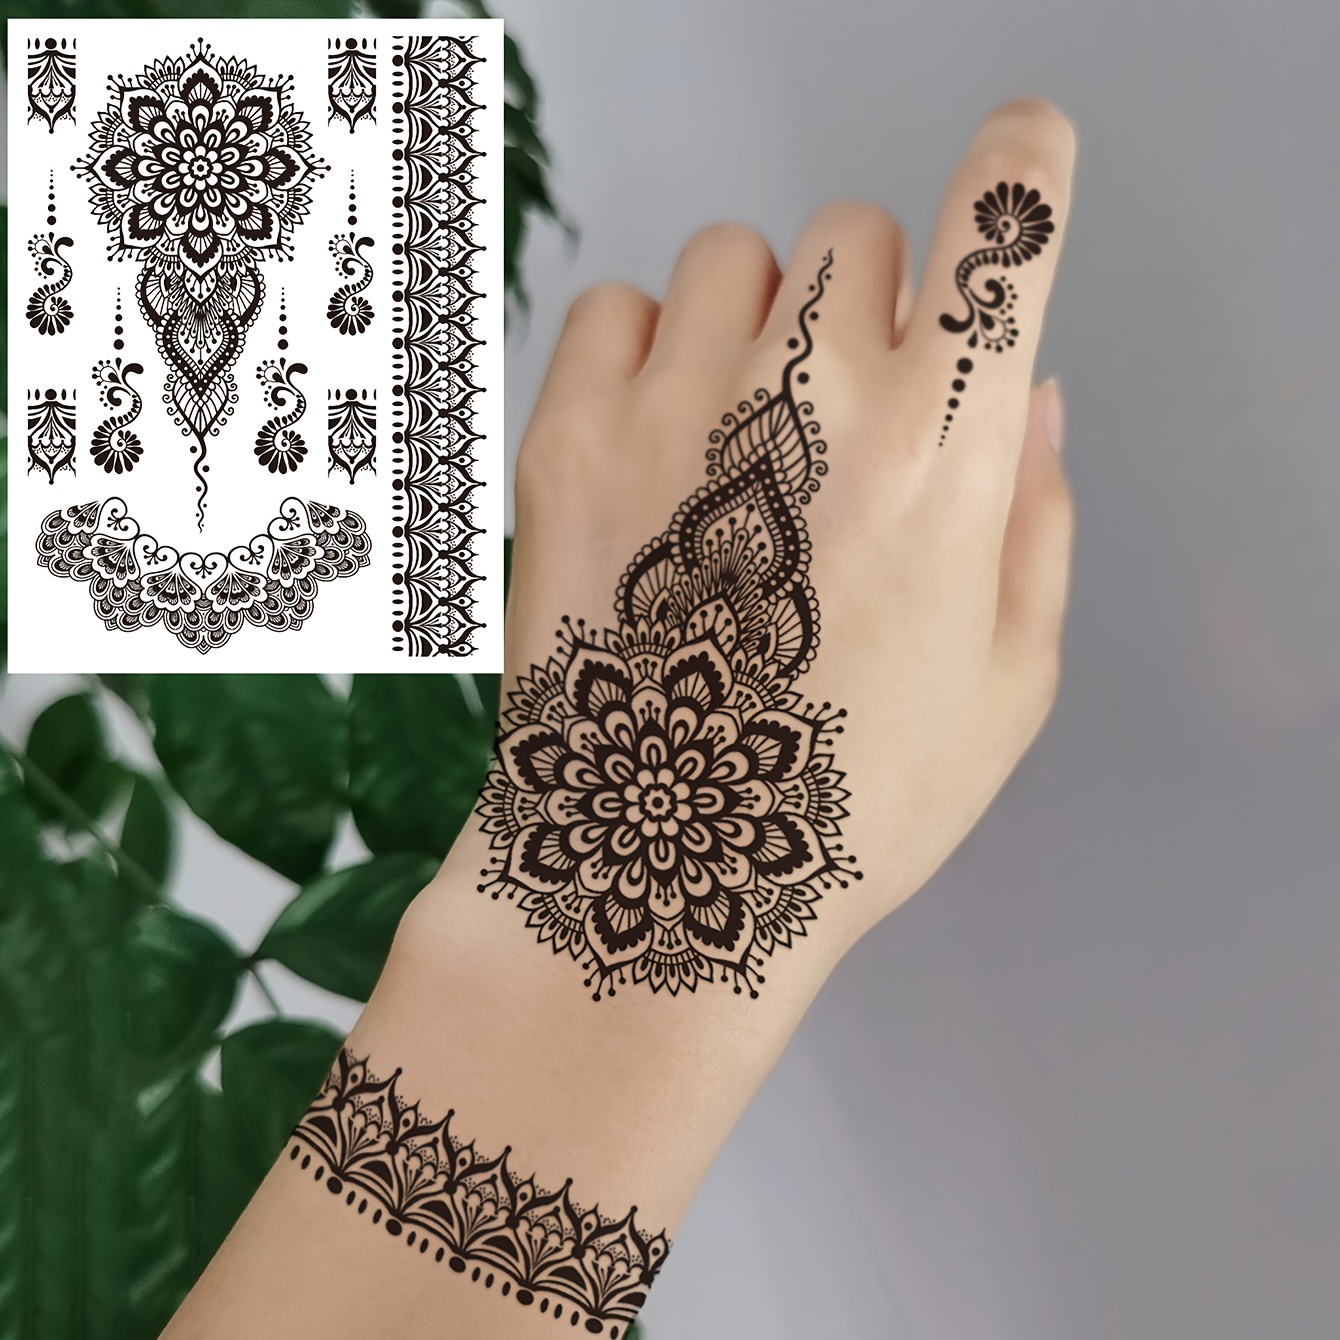 

Black Lace Patterns Fake Tattoos, Finger Wrist Arm Body Art Temporary Tattoo Sticker, Vocation Party Decorations, 1 Sheet